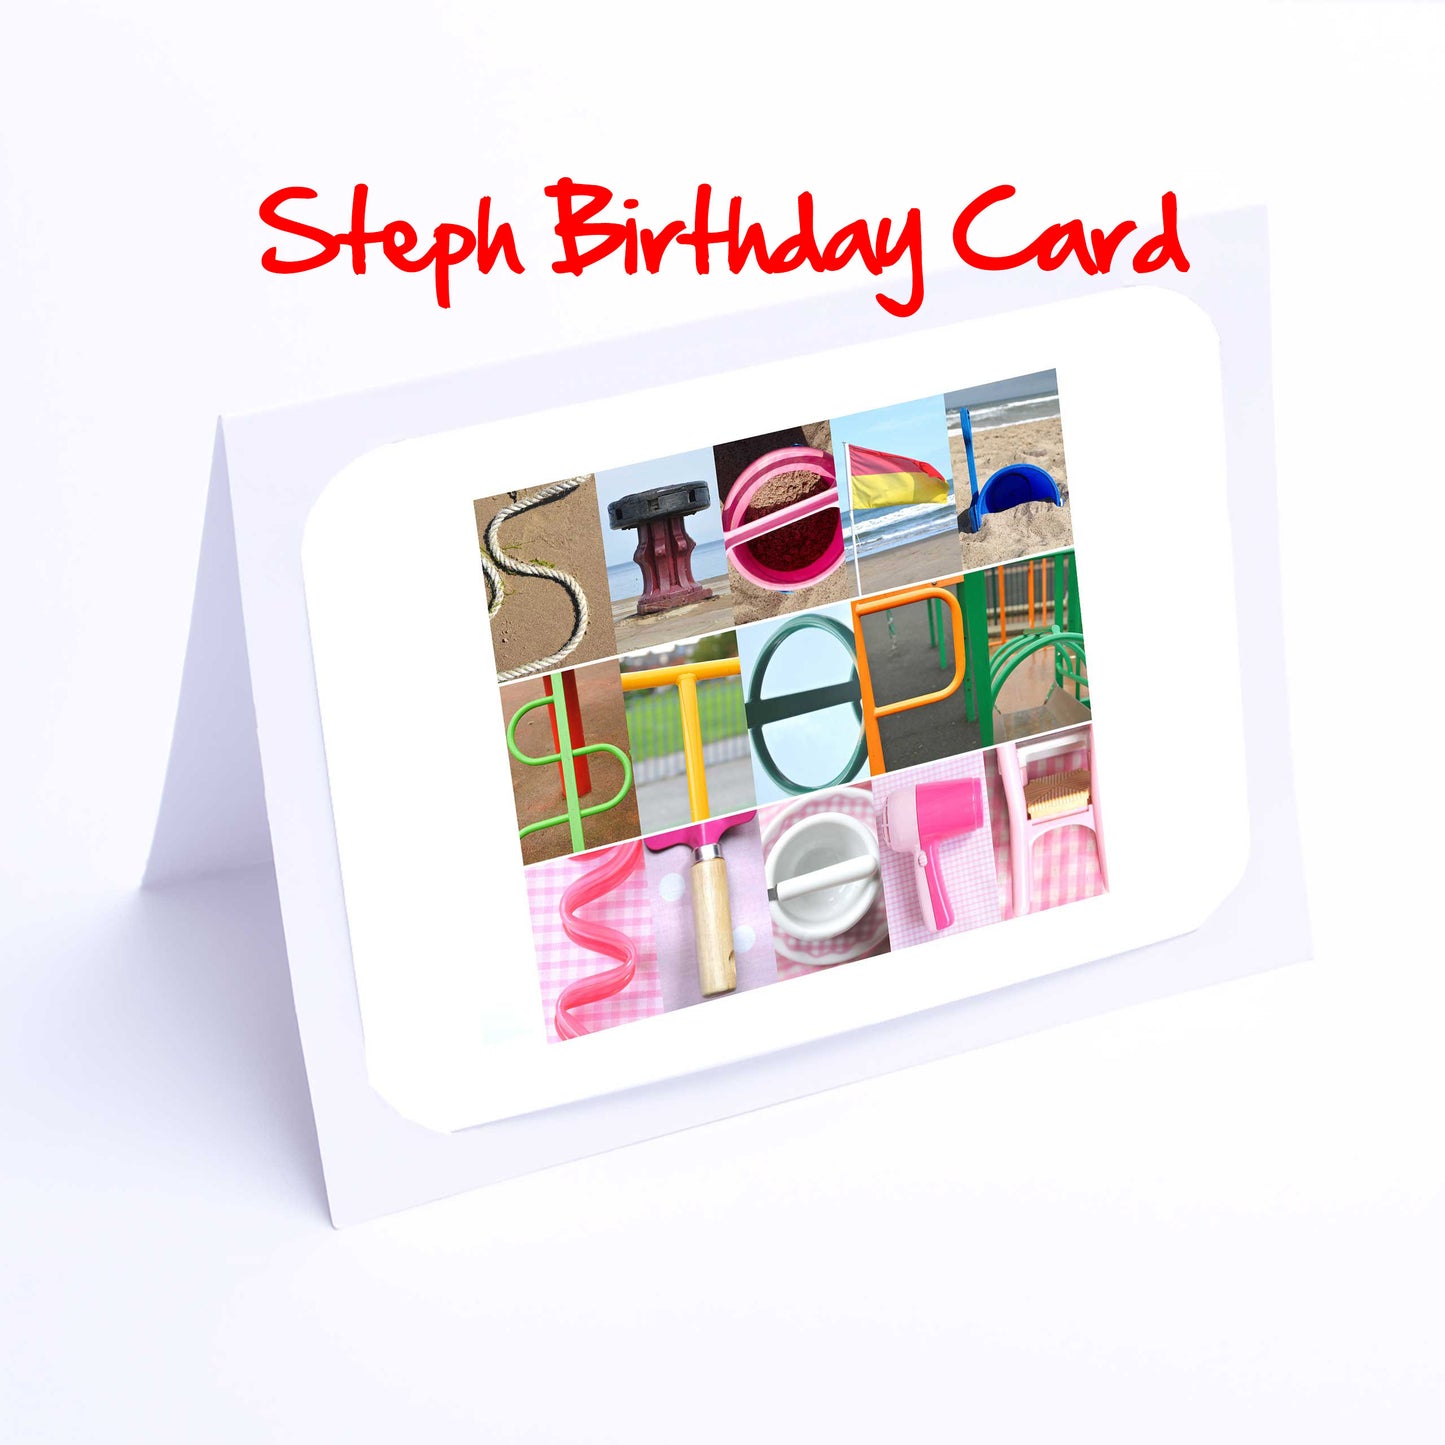 Sian - Sophie Girls Personalised Card - Sian, Sienna, Siobhan, Skye, Sofia, Sofie, Sophia, Sophie, Stacey, Stella, Steph, Summer, Suzannah Any name - Personalised Cards